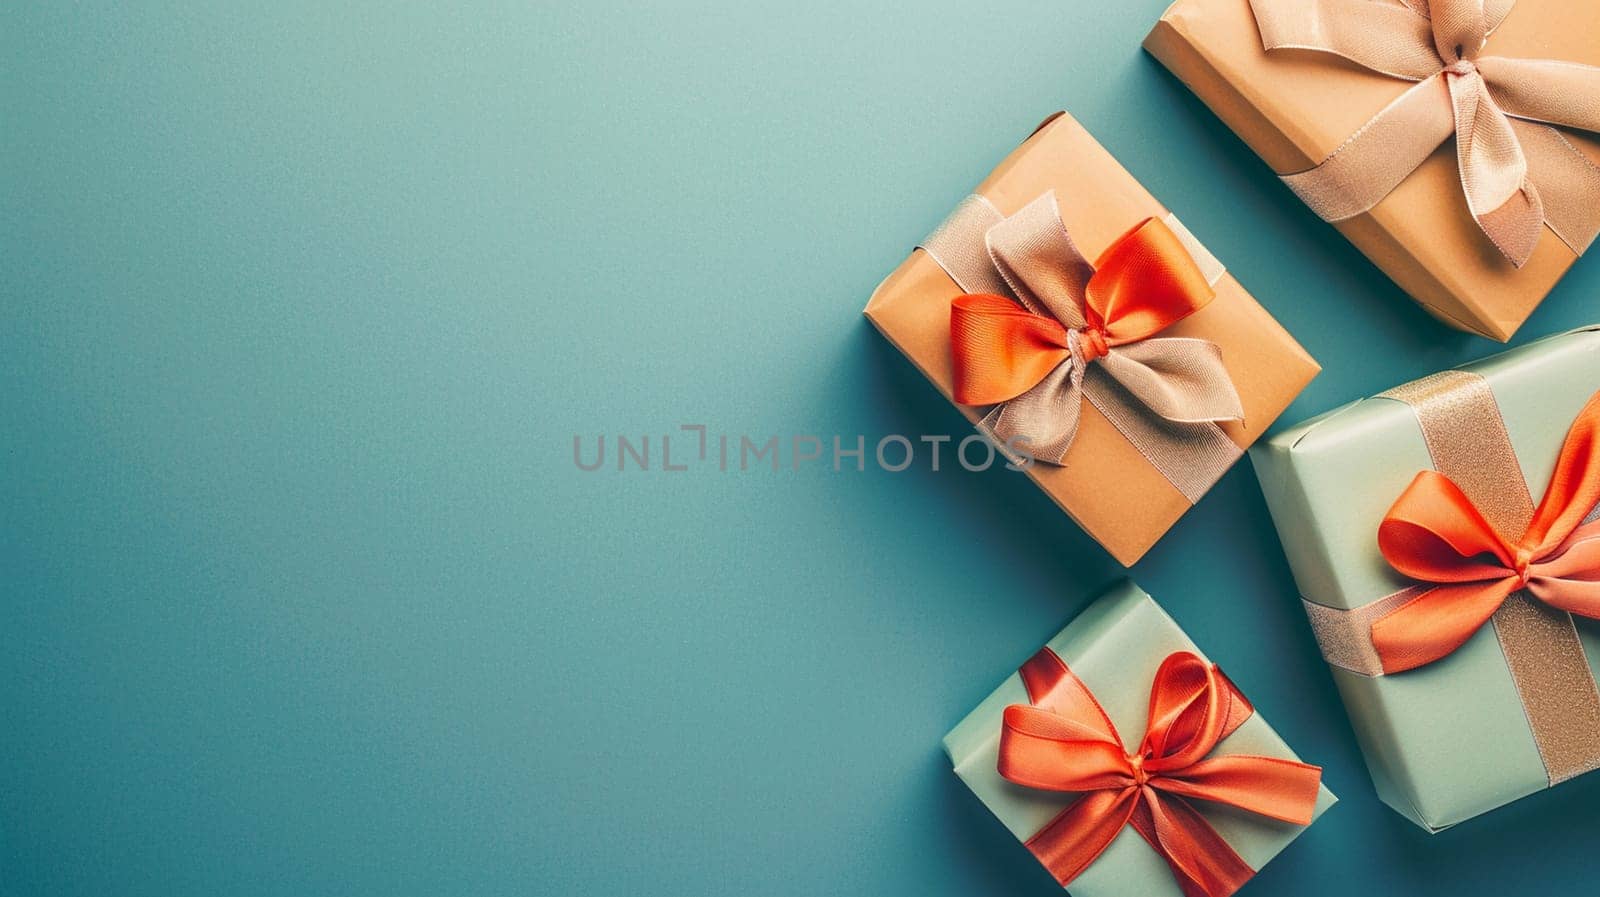 Top view of elegant gift boxes adorned with satin ribbons, beautifully arranged on a vibrant blue background, conveying celebration and generosity.